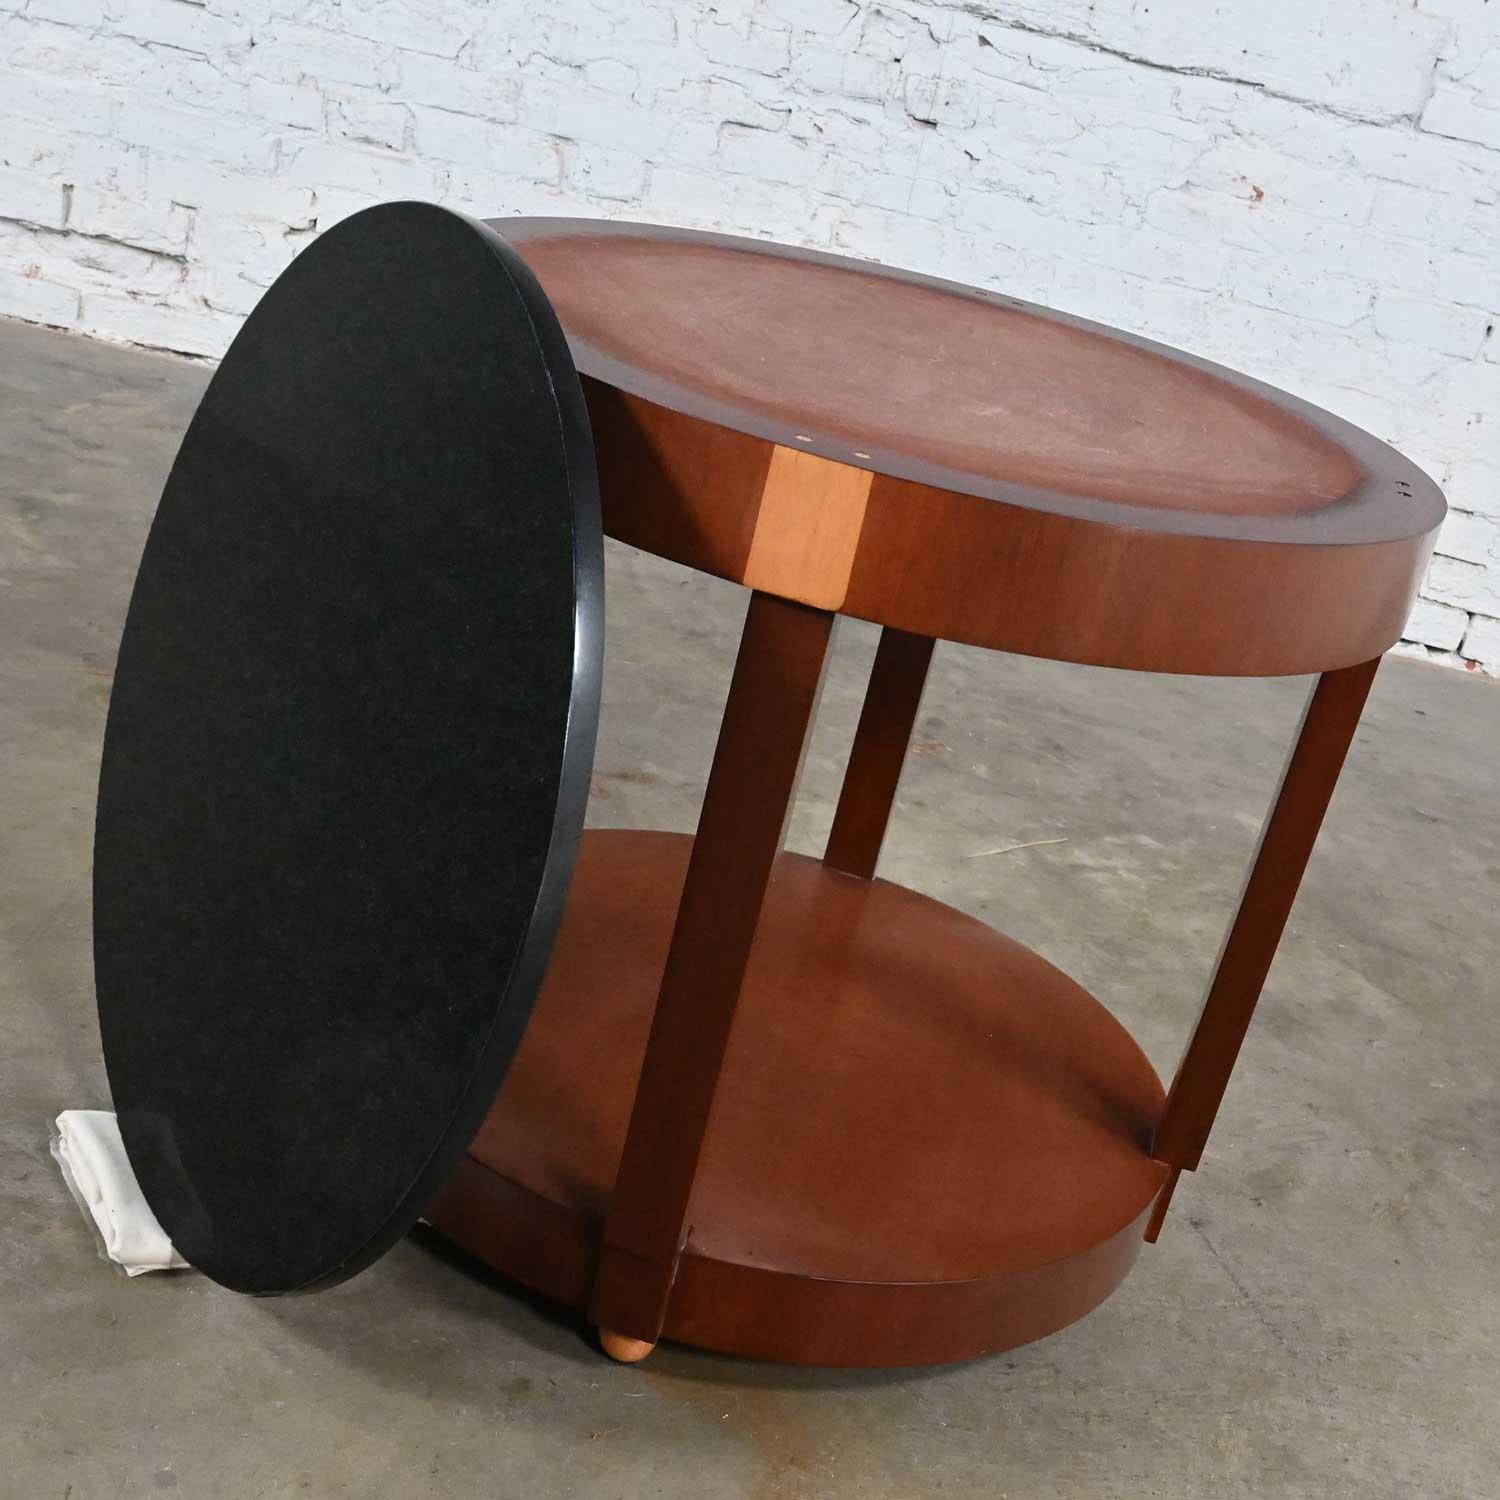 Art Deco Revival Custom Two Toned Mahogany Round Side Table Black Granite Top For Sale 2